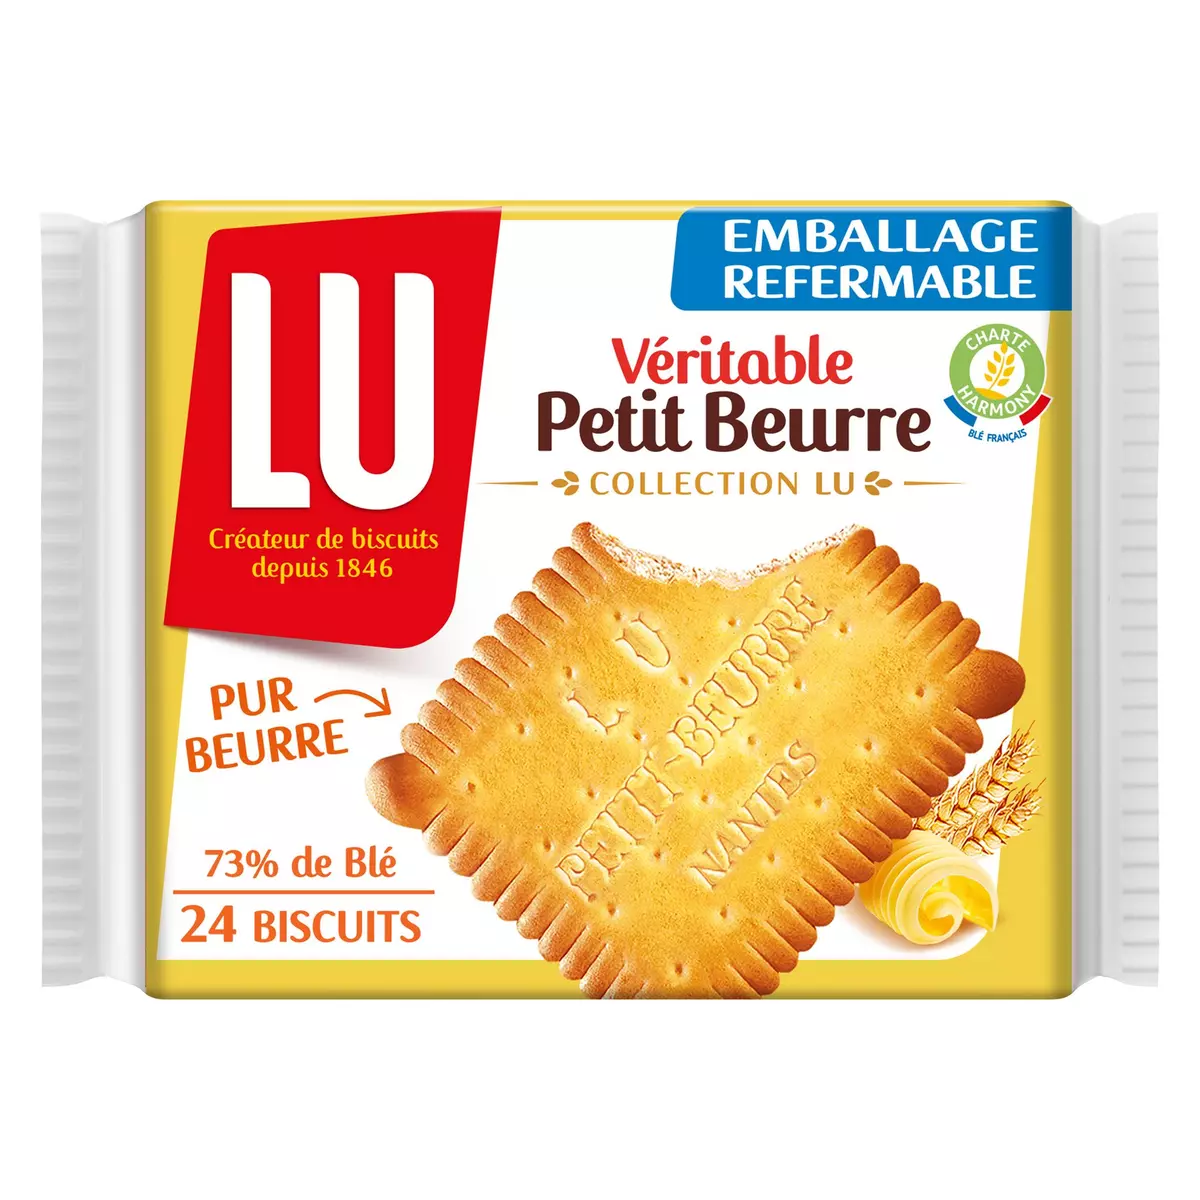 LU Véritable petit beurre, emballage refermable 24 biscuits 200g